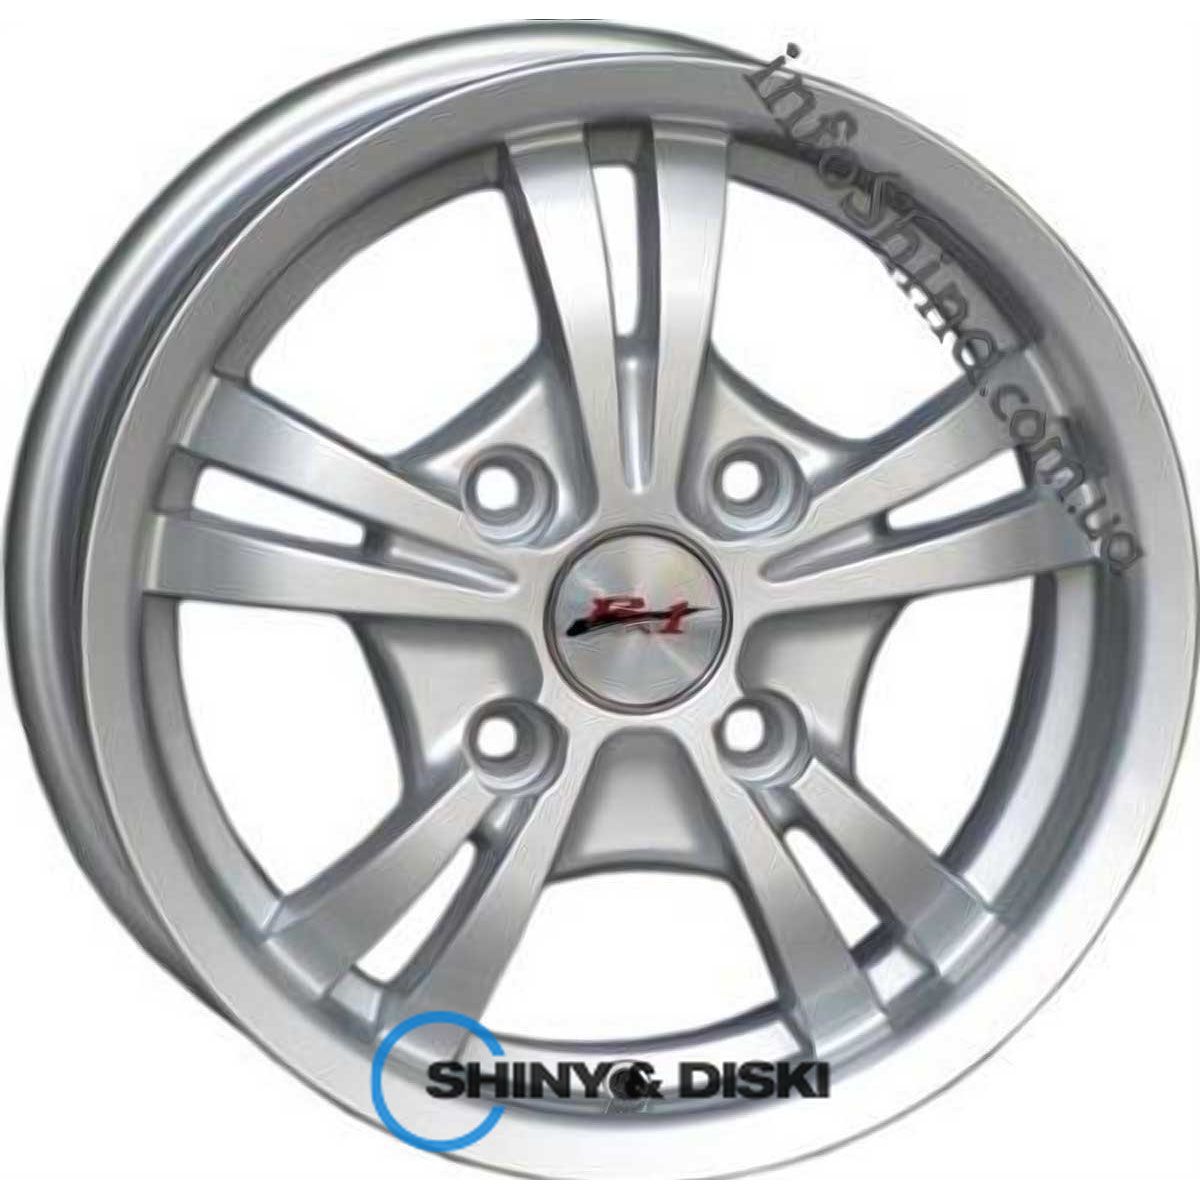 rs tuning 522d mlhs r13 w5.5 pcd4x114.3 et35 dia59.6